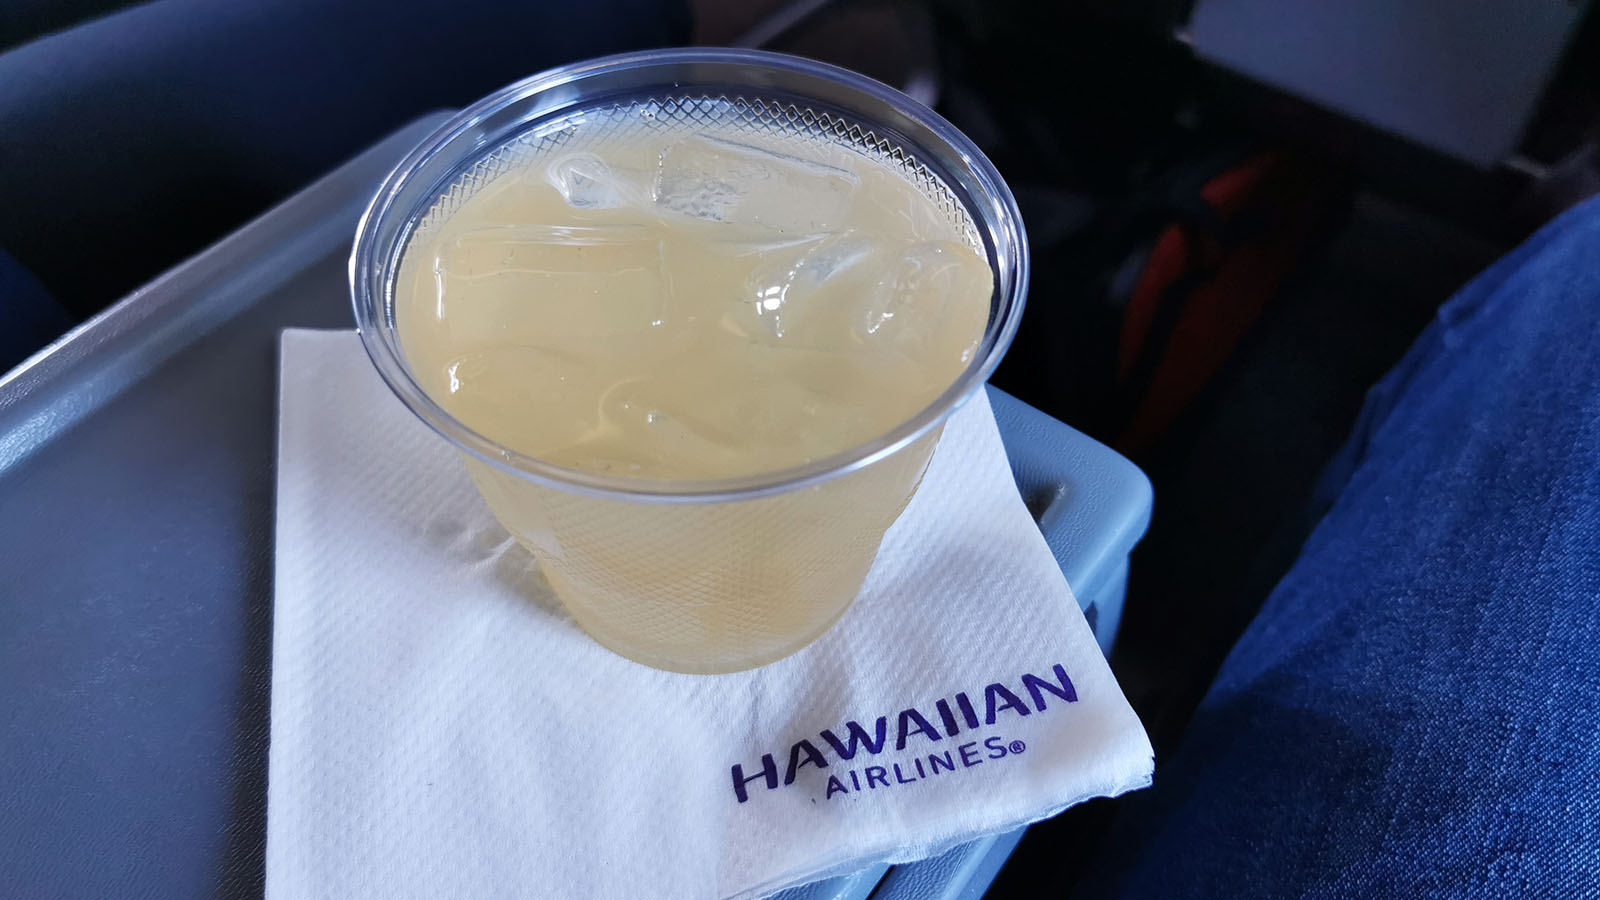 Refreshment in First Class with Hawaiian Airlines